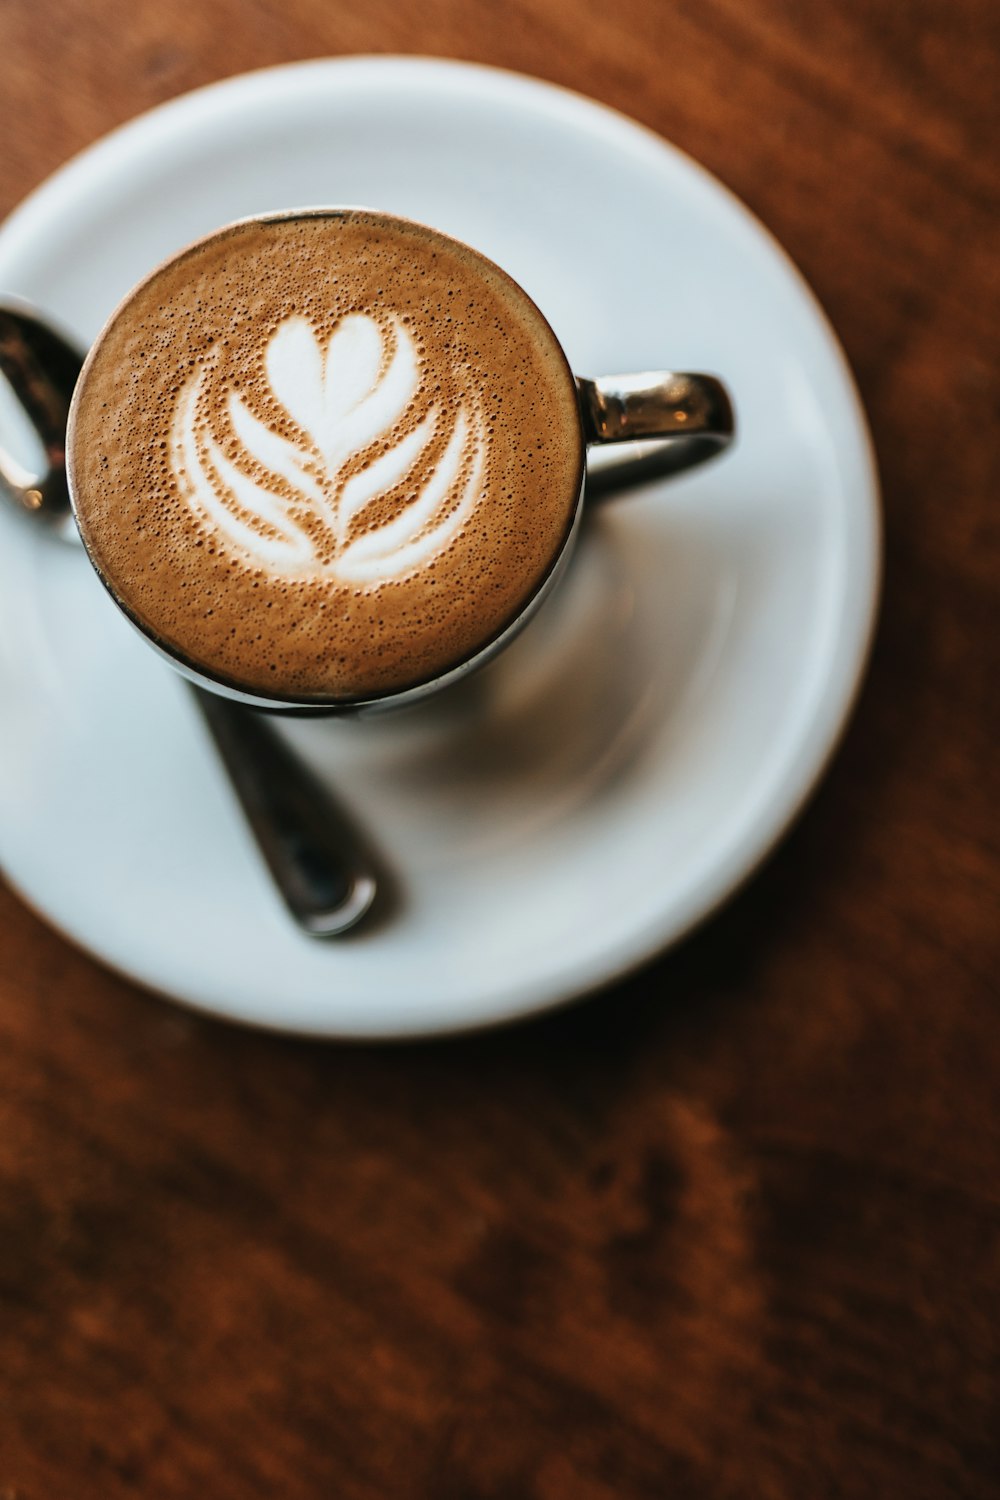 Download 100+ Coffee Wallpapers HD | Download Free Images & Stock Photos On Unsplash